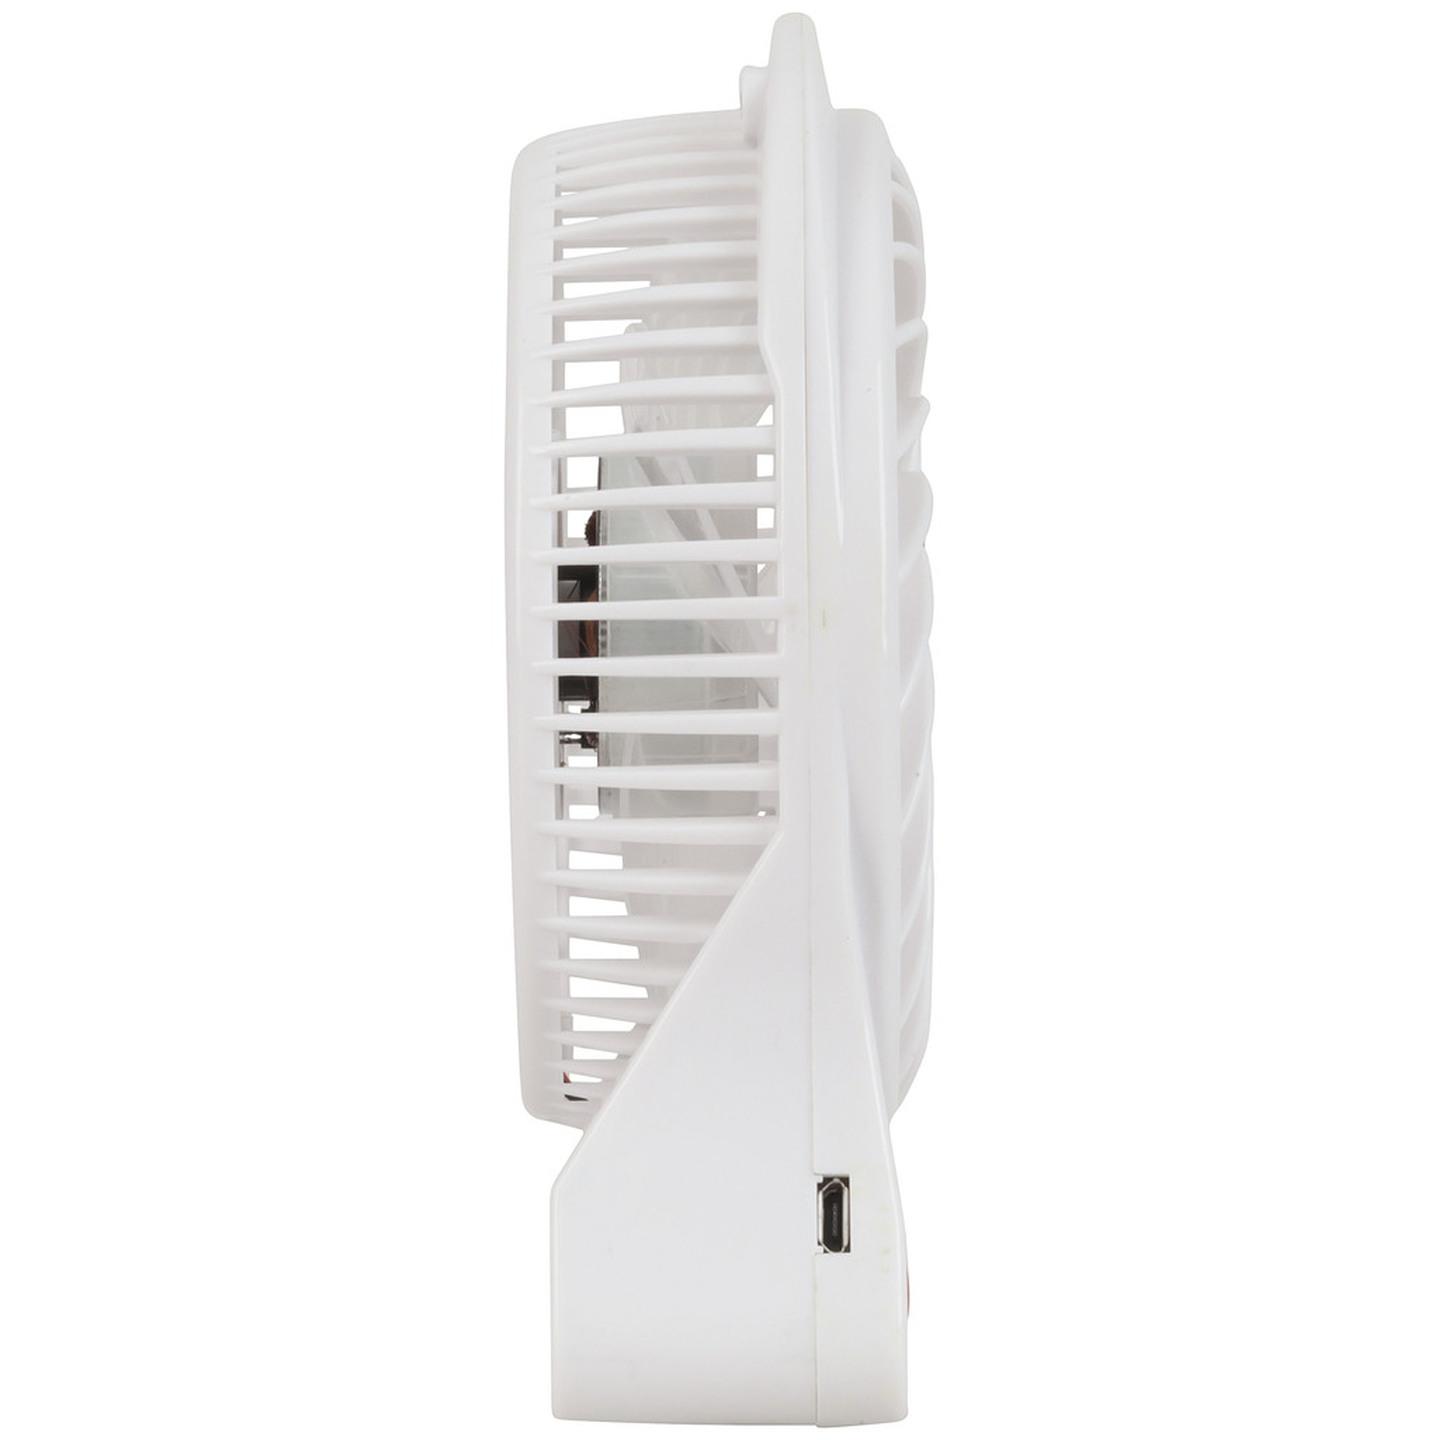 Mini USB Rechargeable 3 Speed Fan with LED Light - White